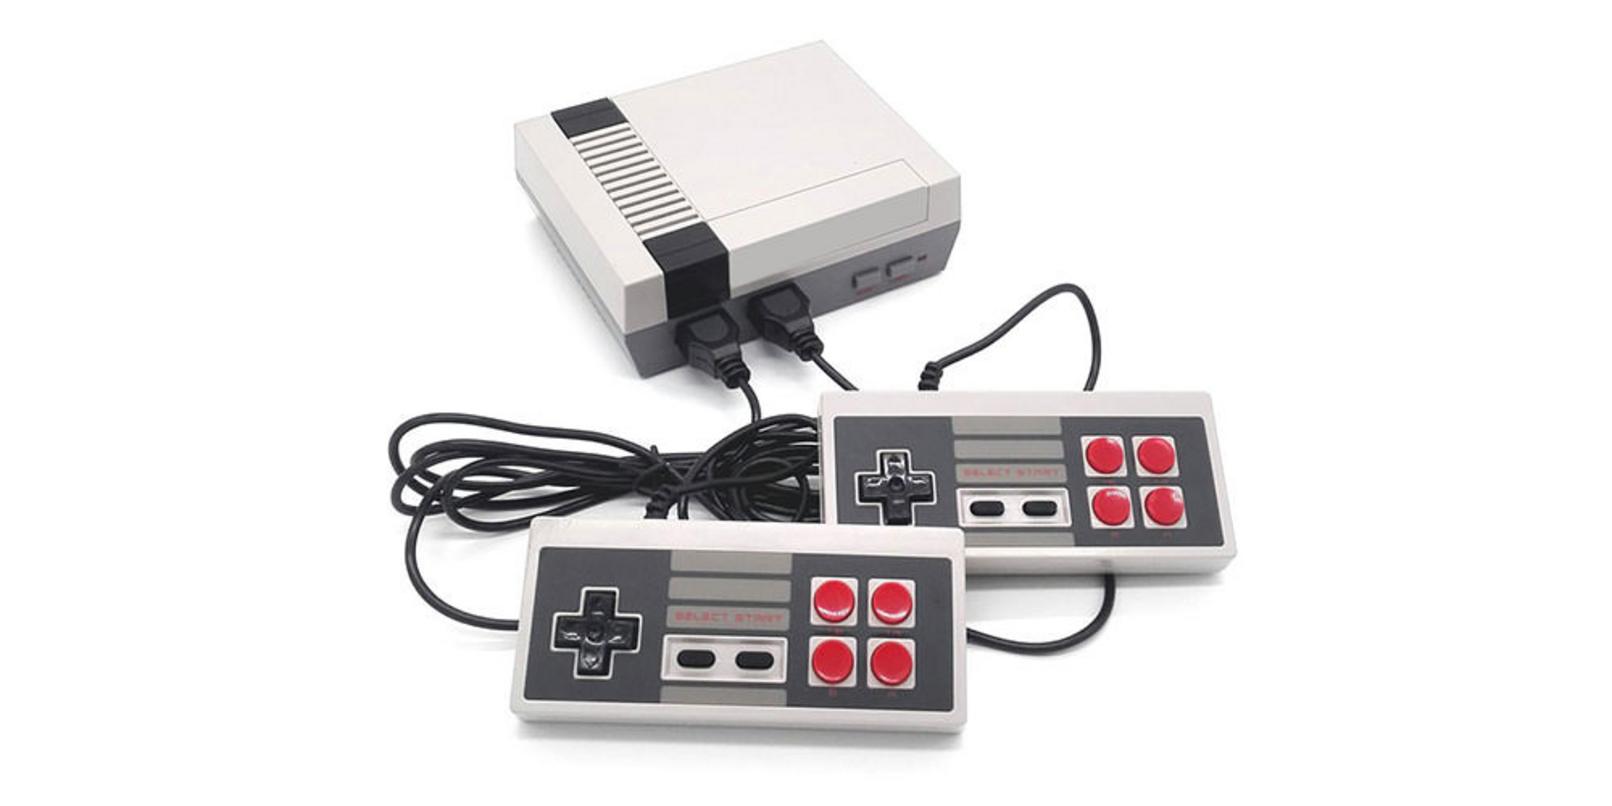 classic video game console with over 500 games